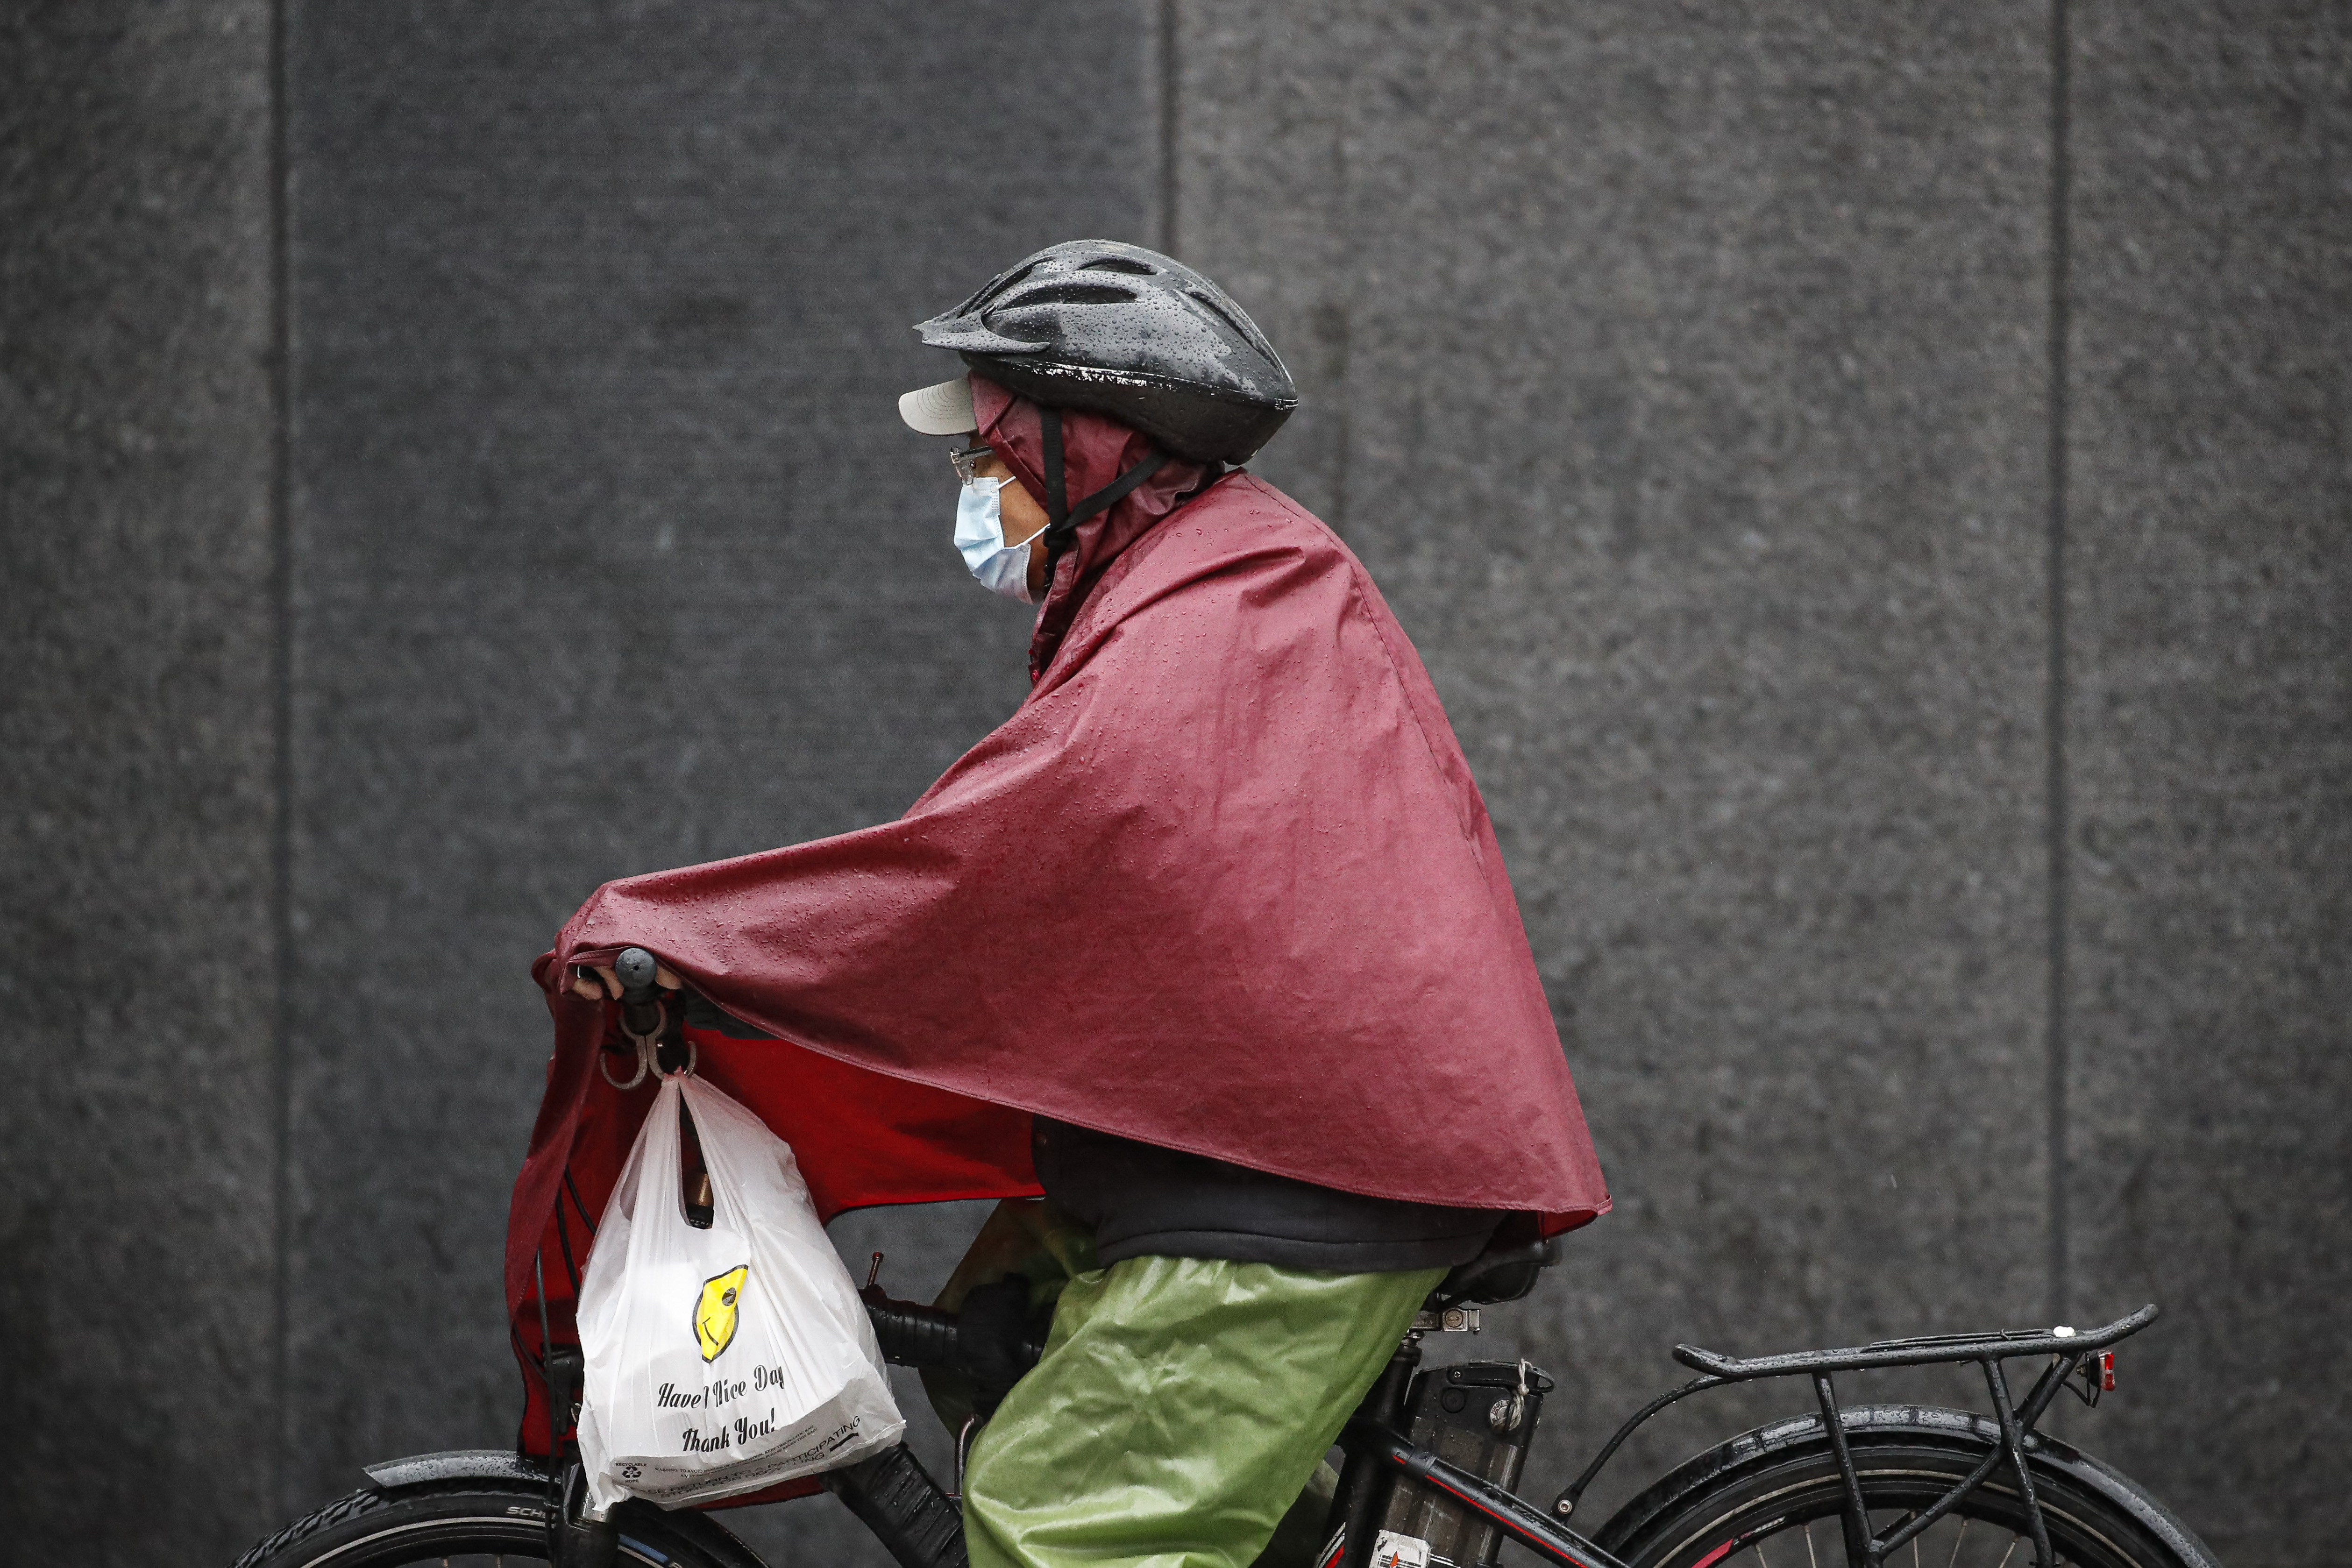 A delivery worker wears personal protective equipment due to COVID-19 concerns while riding a bicycle through the rain outside NYU Langone Medical Center, Monday, April 13, 2020, in New York. The new coronavirus causes mild or moderate symptoms for most people, but for some, especially older adults and people with existing health problems, it can cause more severe illness or death. (AP Photo/John Minchillo)